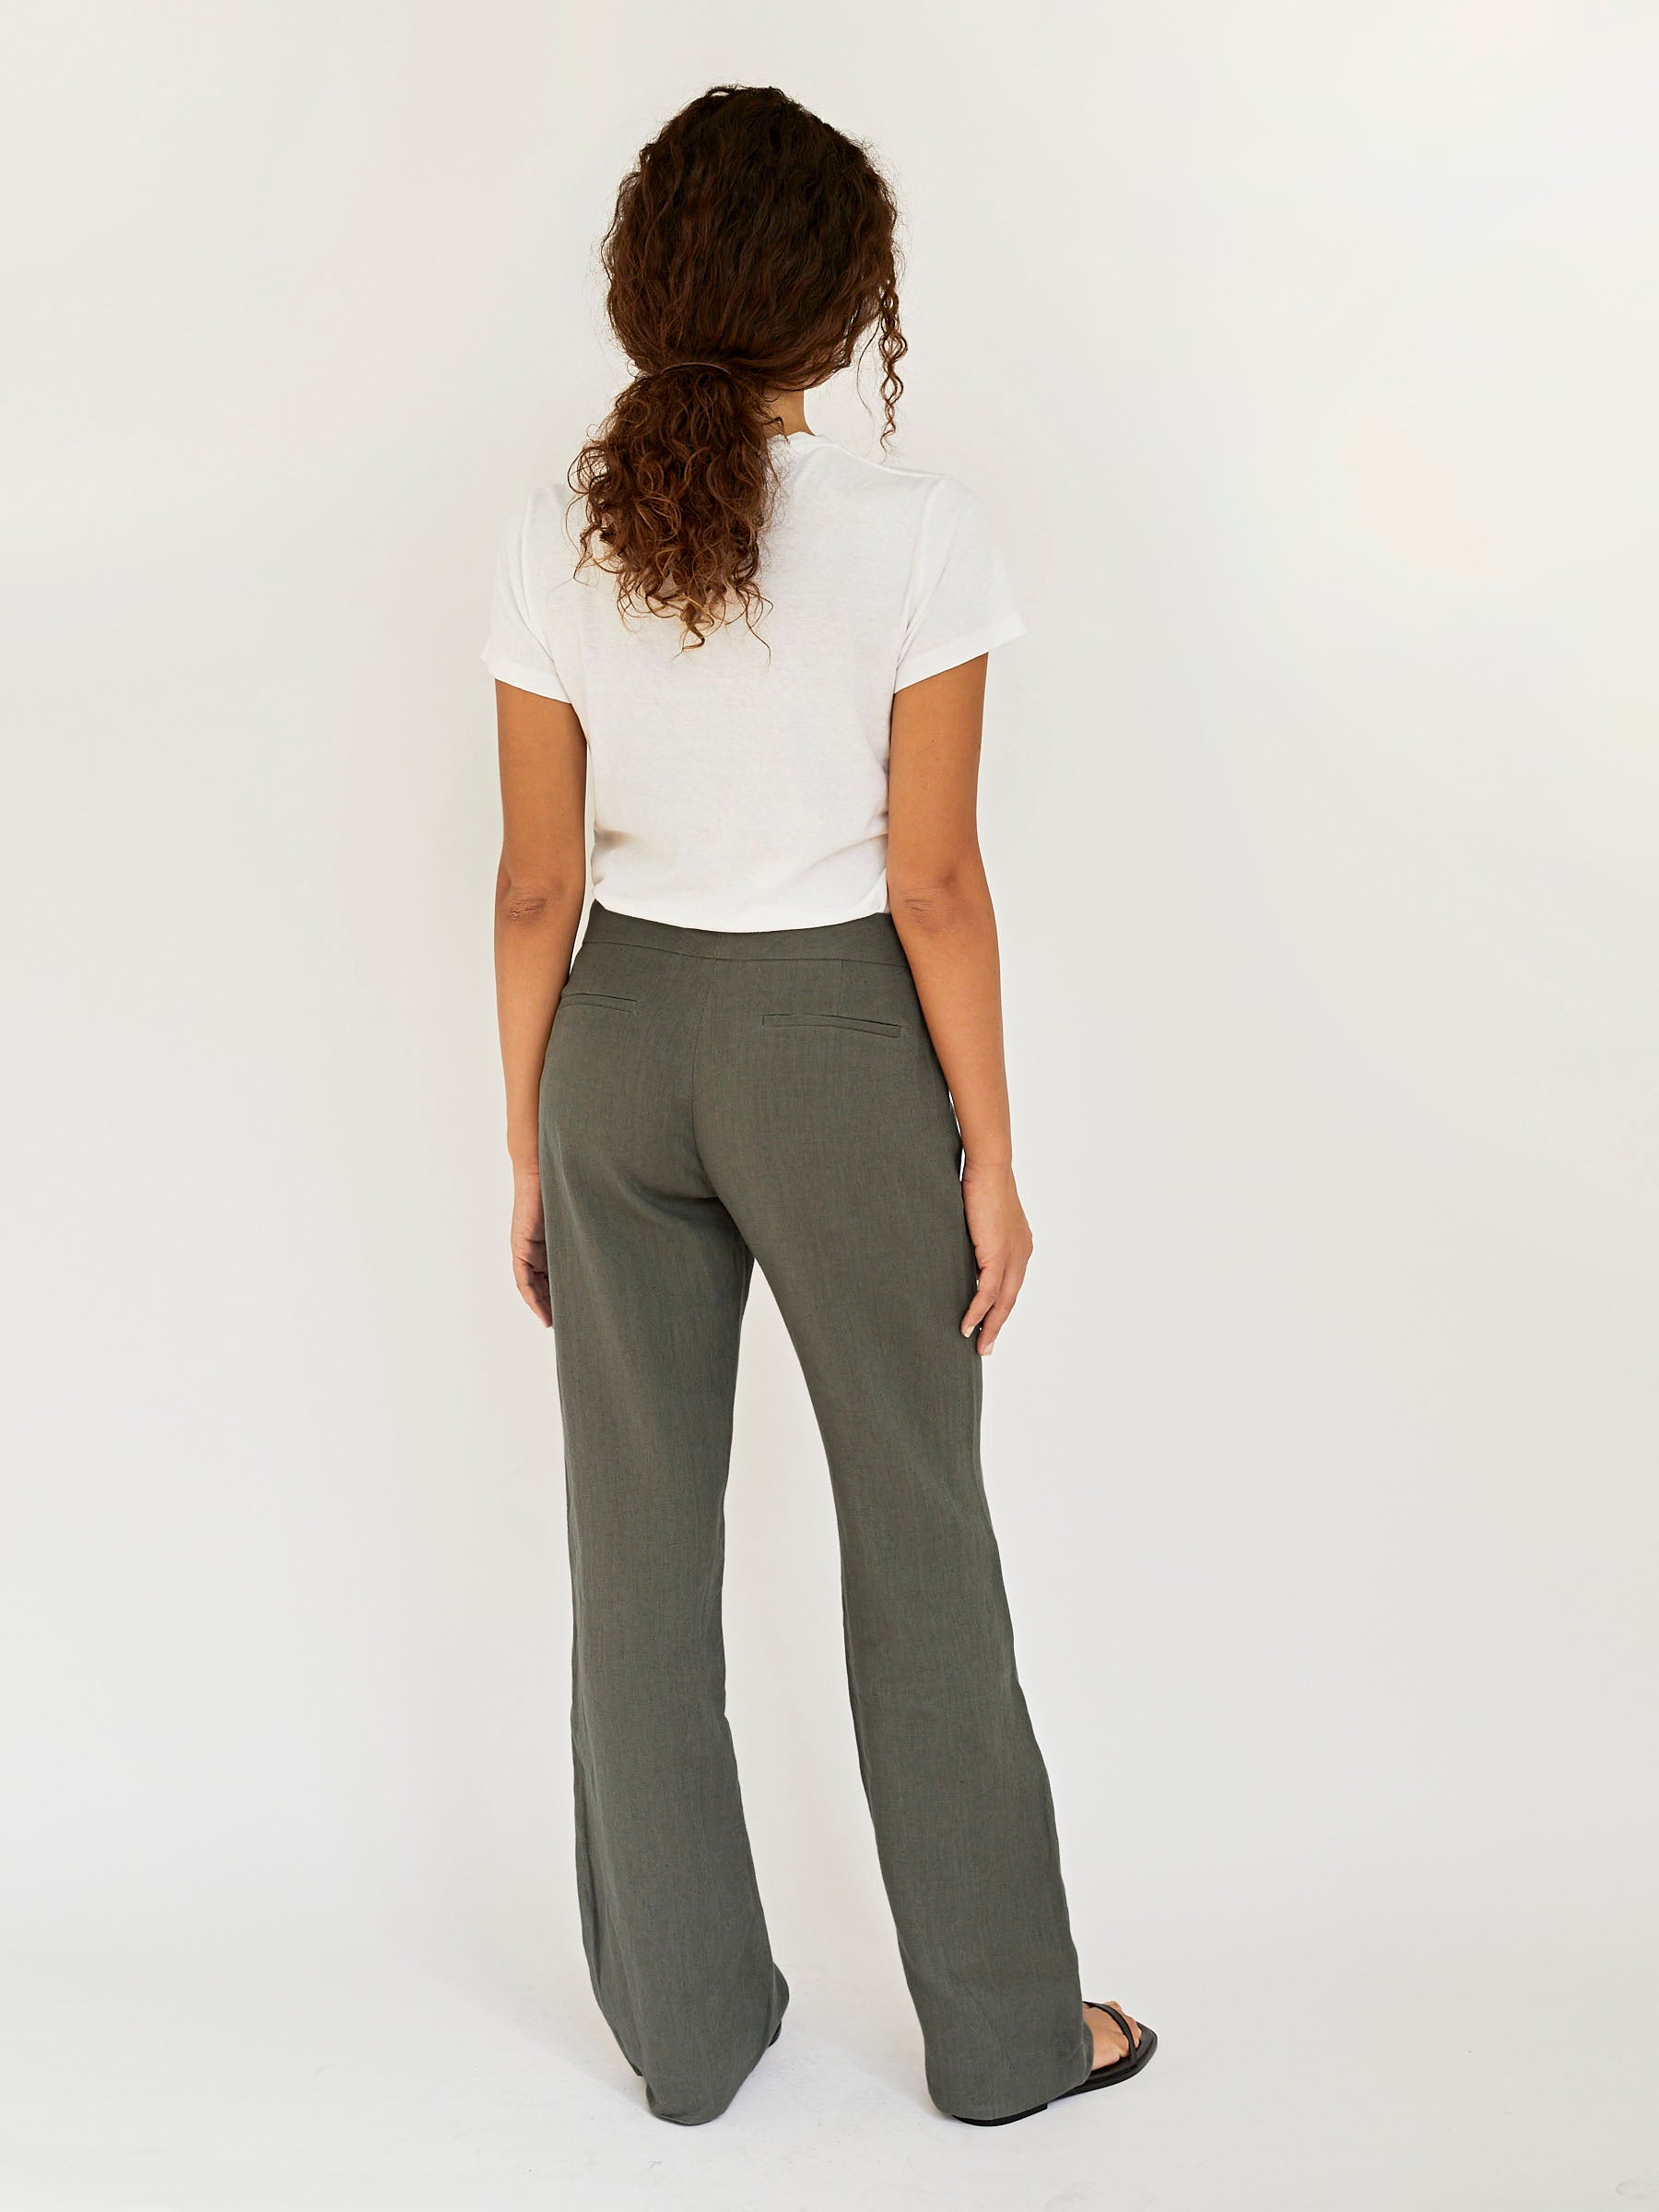 Buy Grey & Green Trousers & Pants for Girls by INDIWEAVES Online